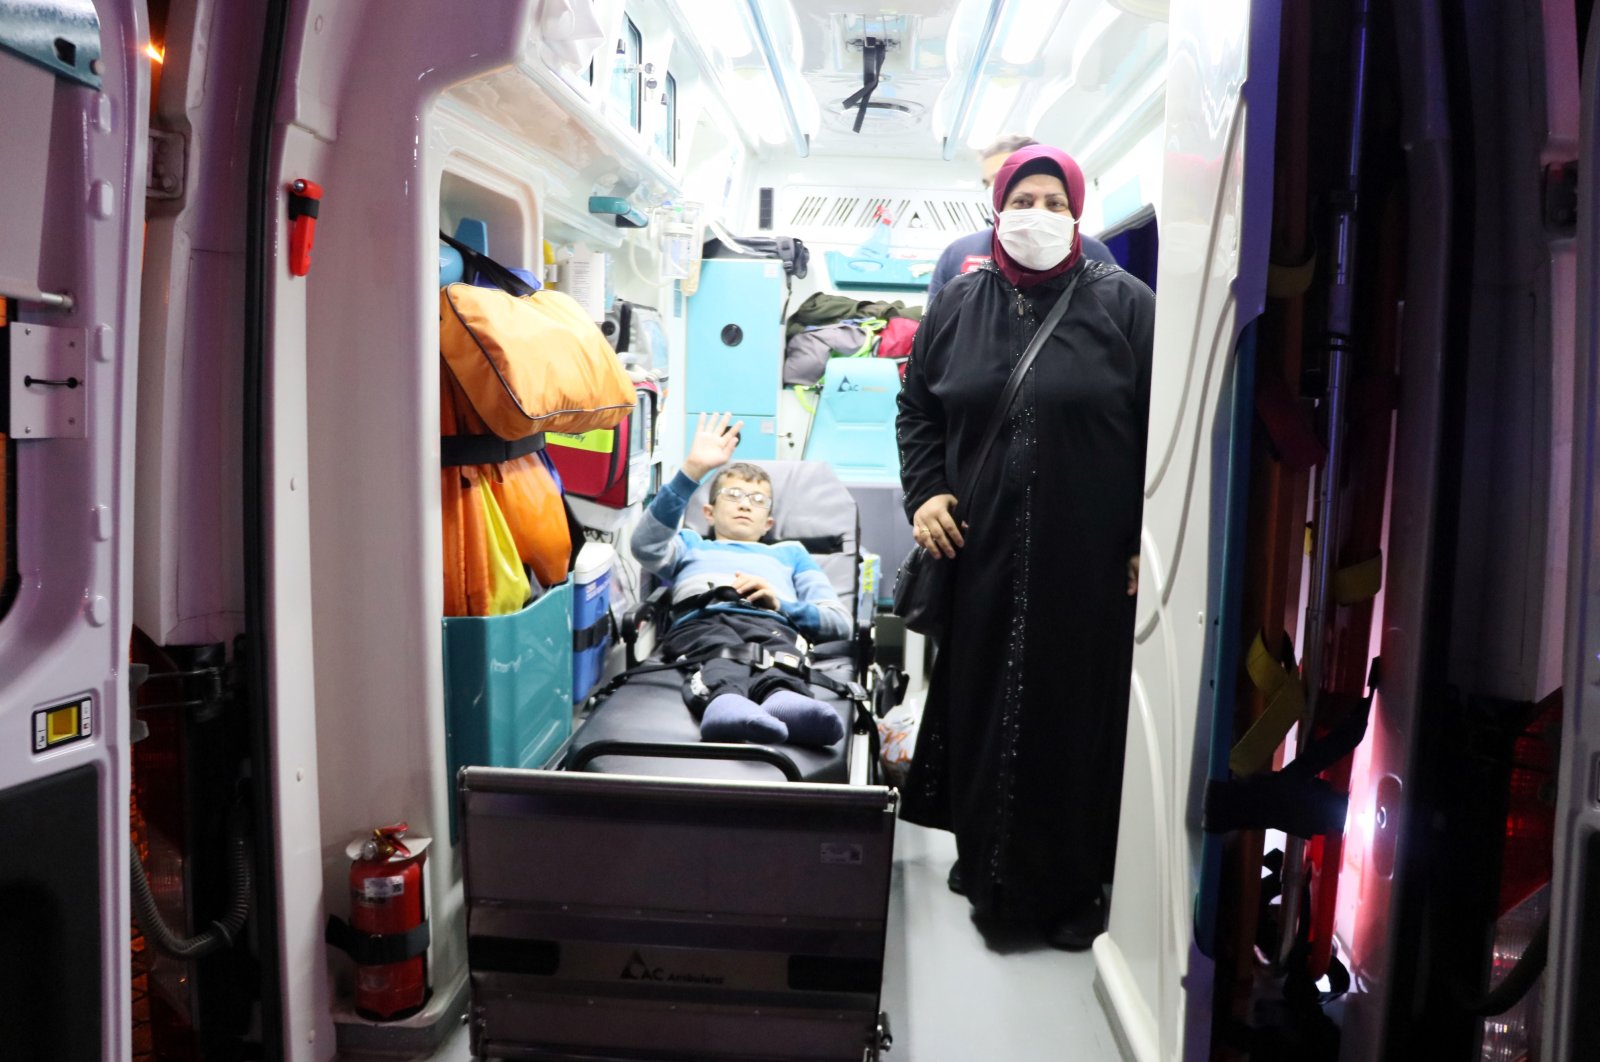 Mohammed Jamil Shahabi and his mother, Umm Mohammed Shahabi, wait in an ambulance before being airlifted to Istanbul, in Samsun, northern Turkey, Nov. 8, 2021. (AA PHOTO)